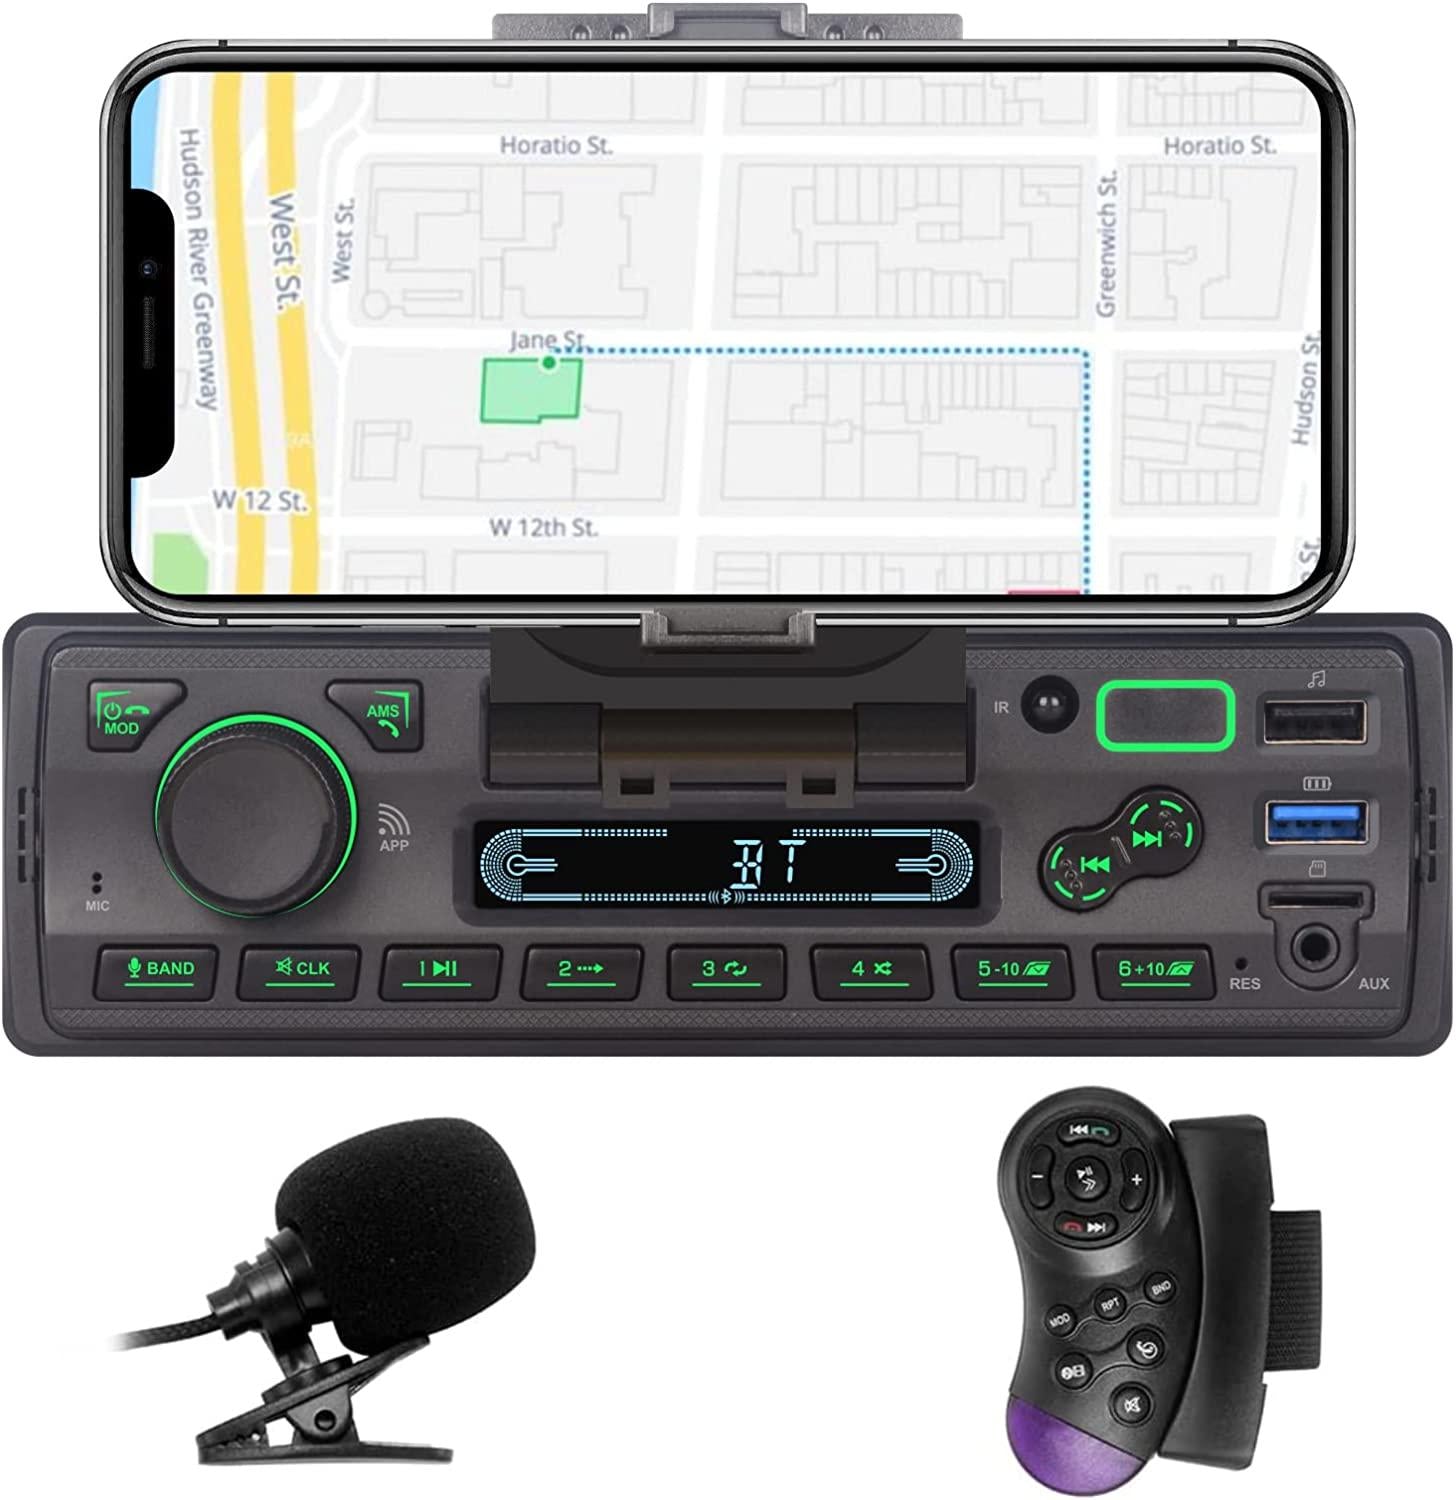 LXKLSZ, LXKLSZ Car Stereo Bluetooth 1 din with APP Control MP3 Player Support USB / FM/ AM/ TF / AUX / Quick Charge / Hands-Free Calls / FM Radio / with Phone Holder